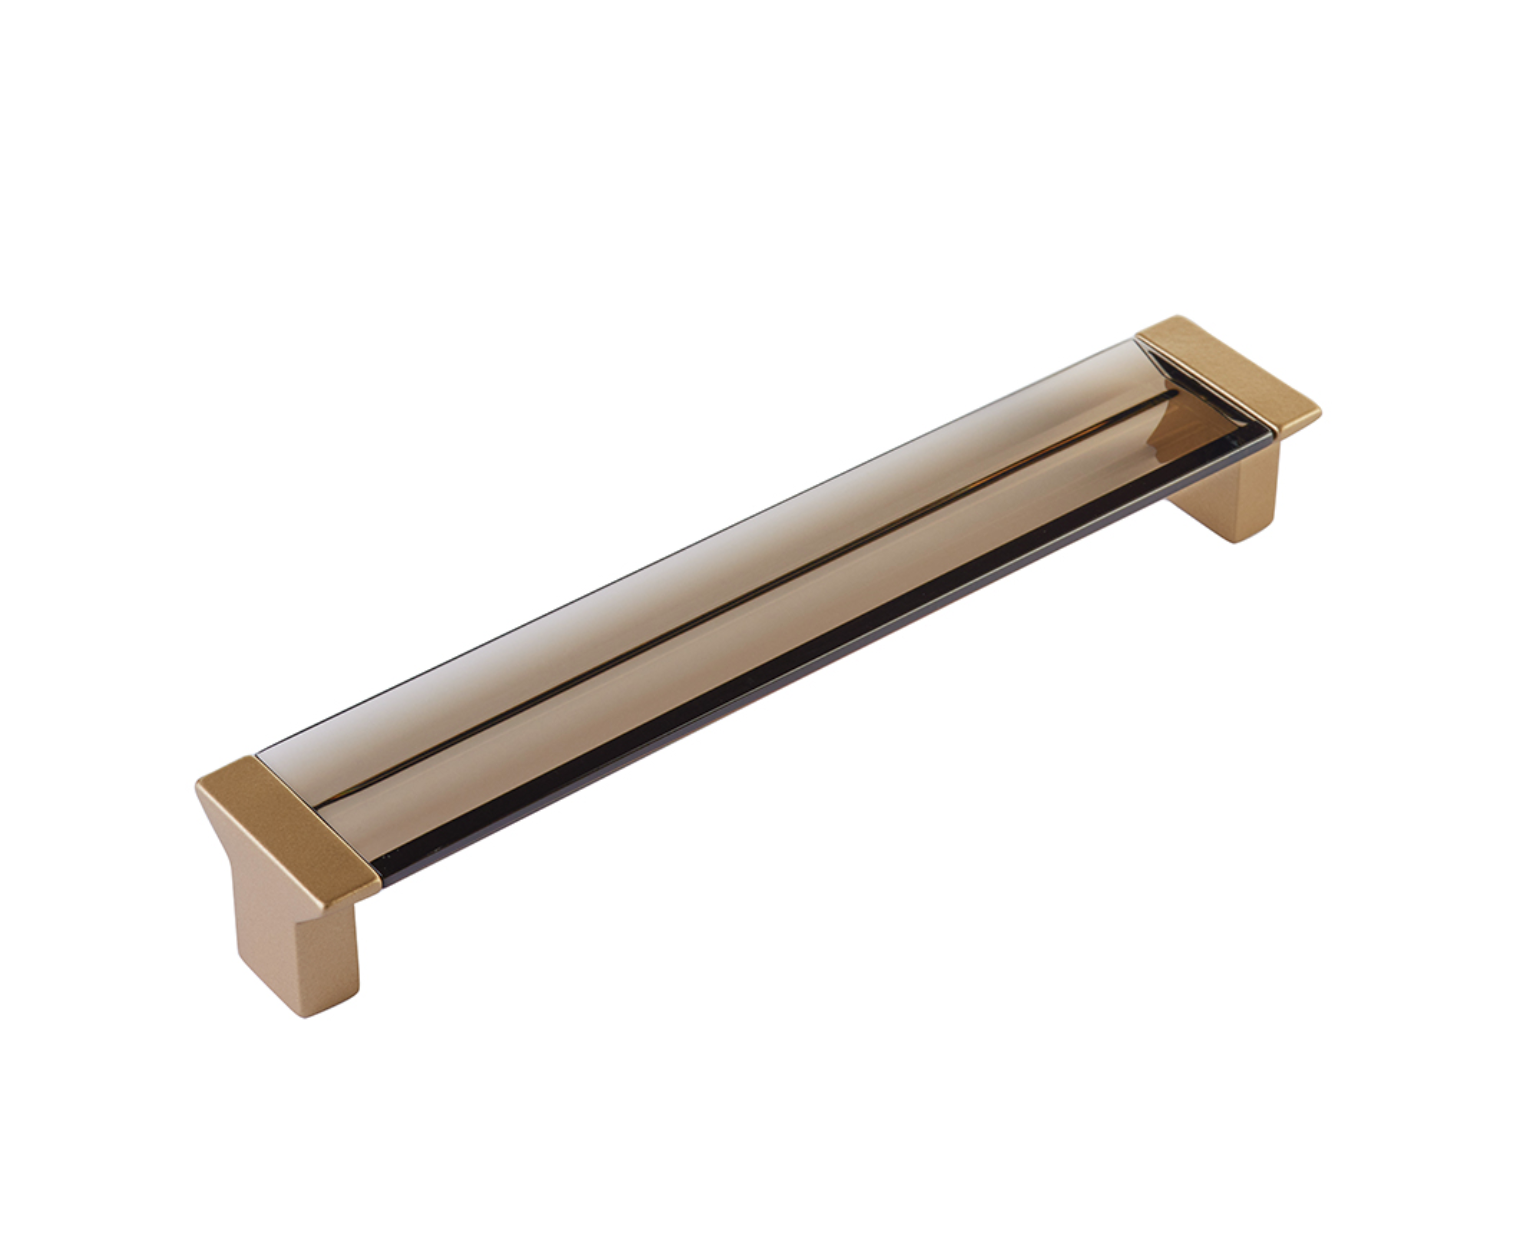 Satin Brass "Ponce" Smoked Glass Cabinet Knob and Drawer Pulls - Industry Hardware